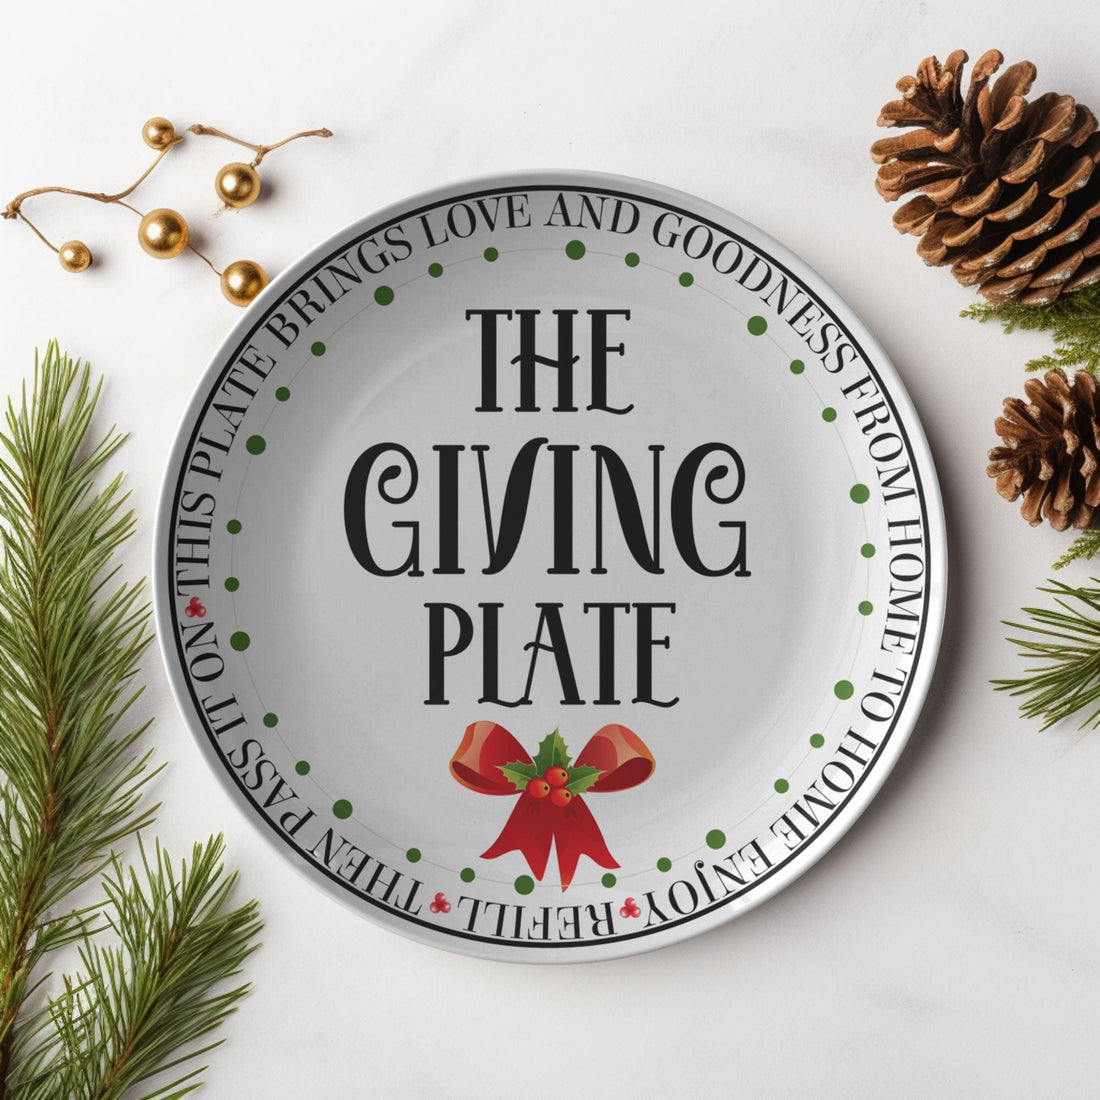 Kate McEnroe New York The Giving Plate, Holiday Circle of Giving, Thanksgiving, Christmas Dinner Plate Plates